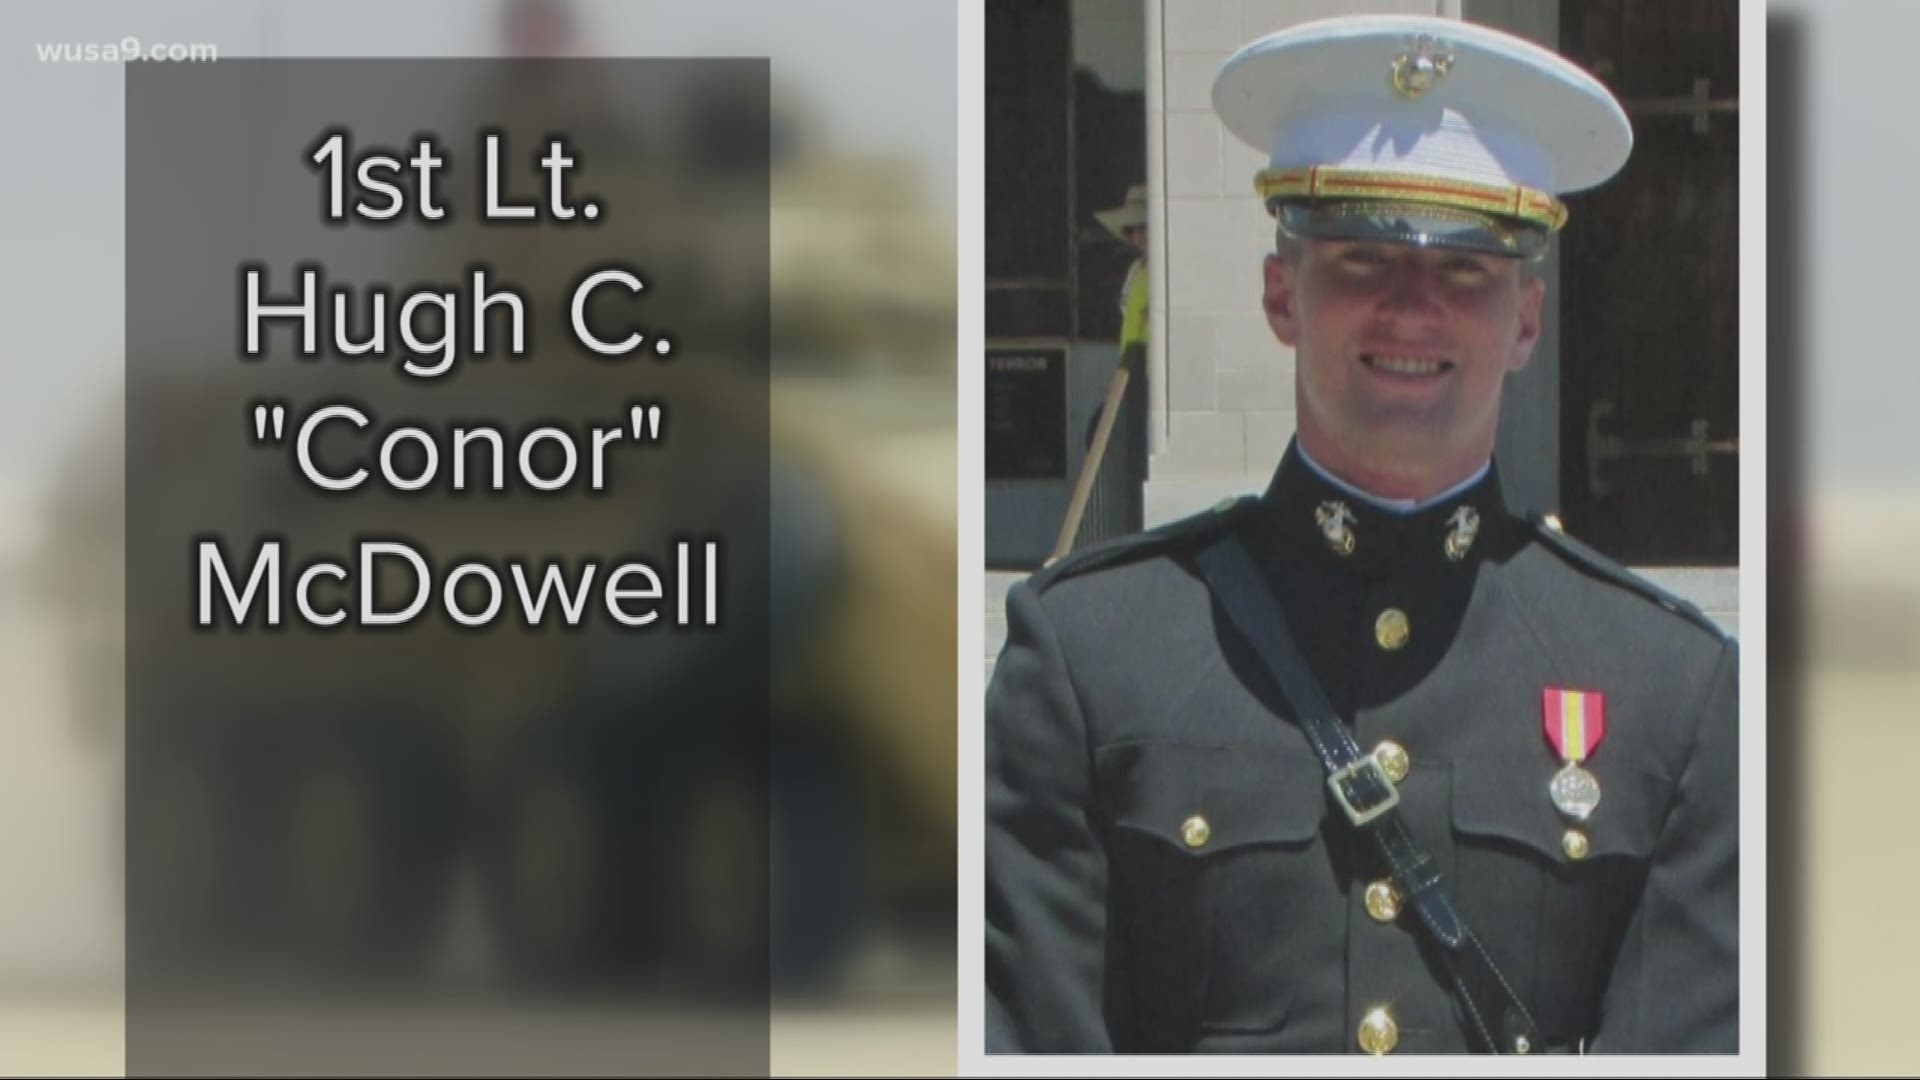 The death of a promising young Marine officer from DC is adding to the shocking toll of Military troops who are being killed in training accidents. 24-year-old Marine 1st Lt. Hugh C. McDowell, known as Conor to his friends, was the second Marine in just the past month to die when vehicles rolled over during training exercises at Camp Pendleton in California.